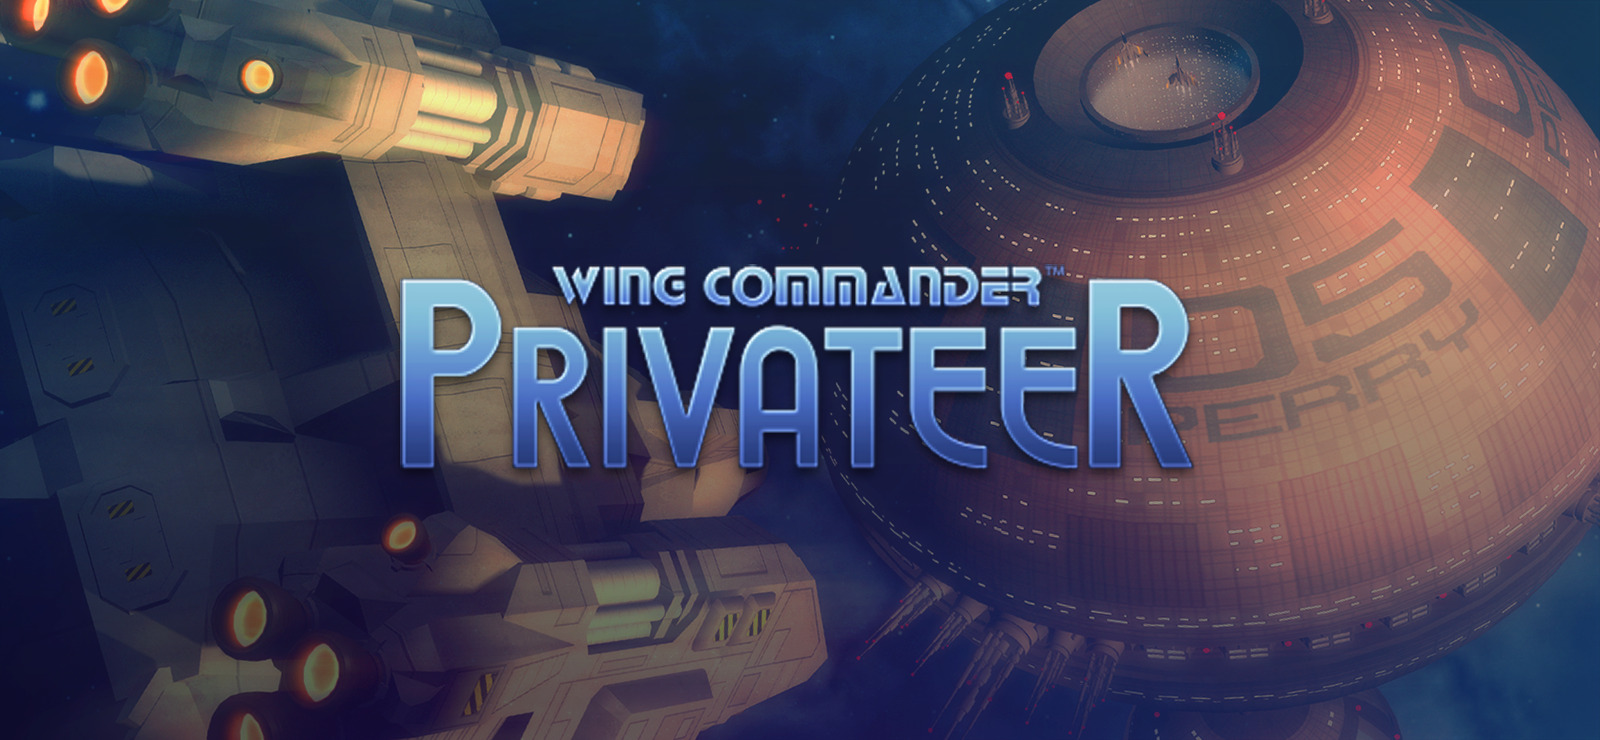 wing commander privateer credits